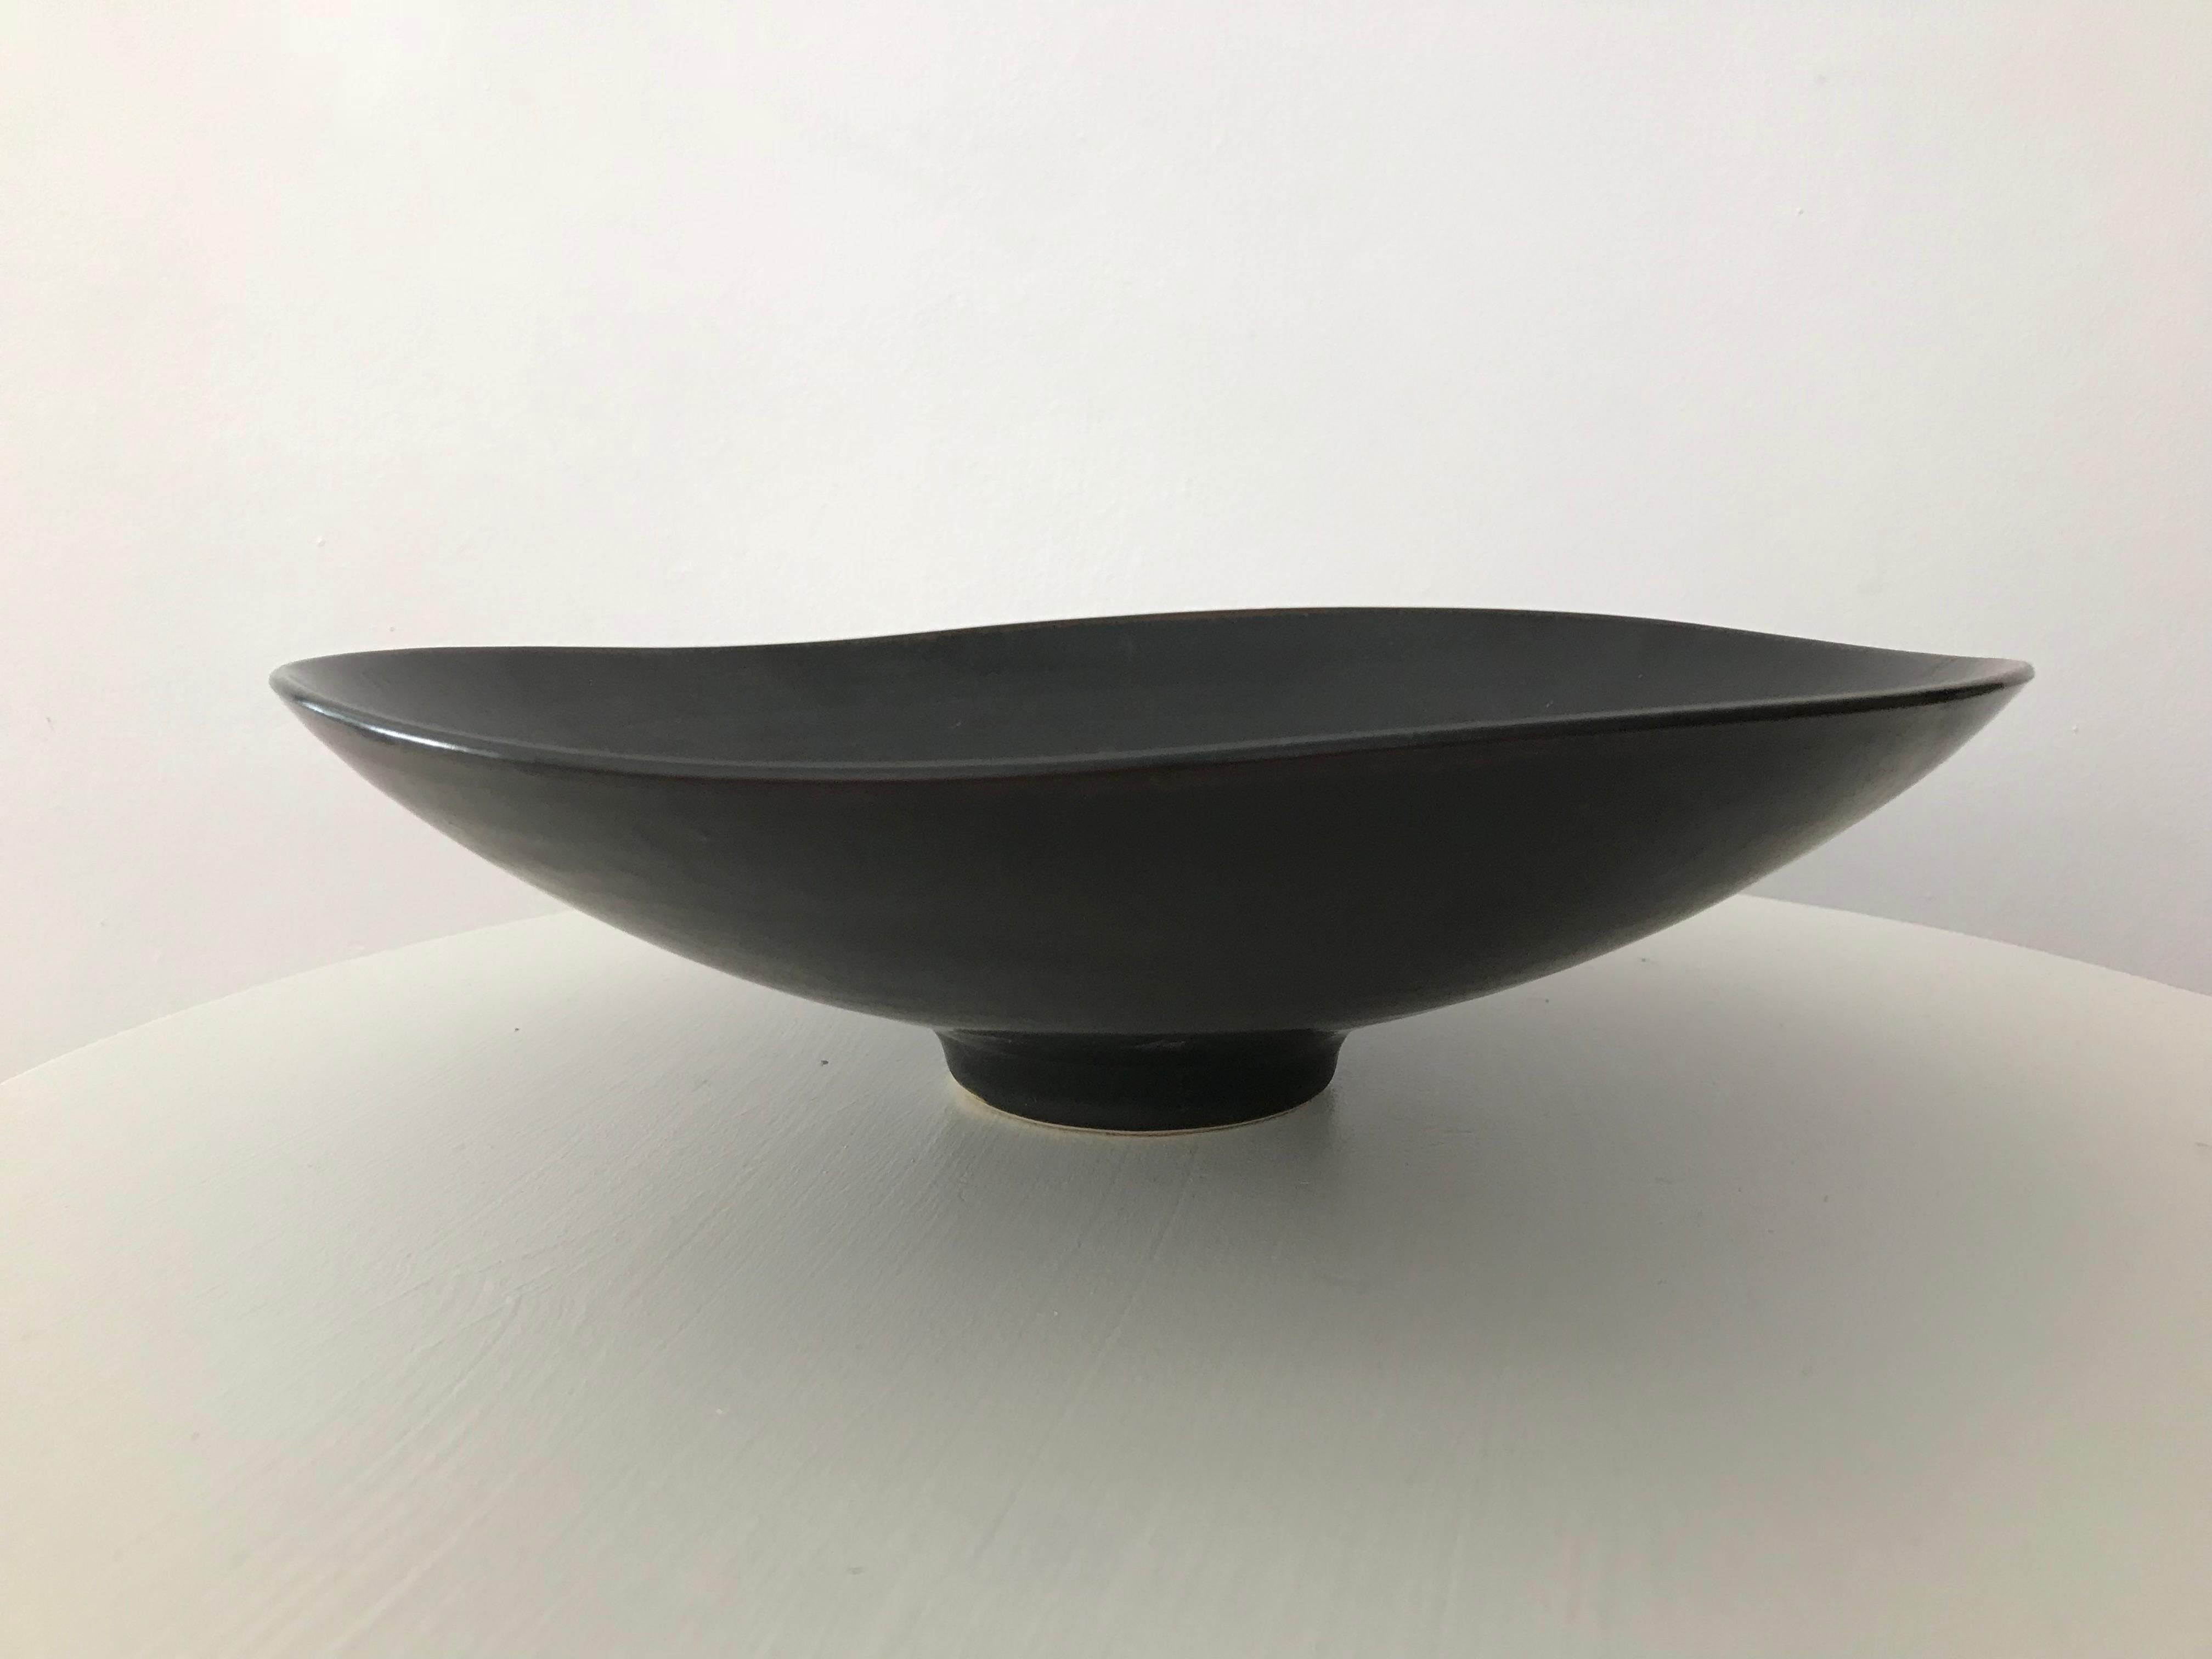 Sleek and nicely executed black haresfur glazed biomorphic footed bowl, designed by Carl Harry Stålhane for Rörstrand, Sweden, circa 1960s. Some minor marks underneath as seen in the pictures - but no chips or cracks. Presents